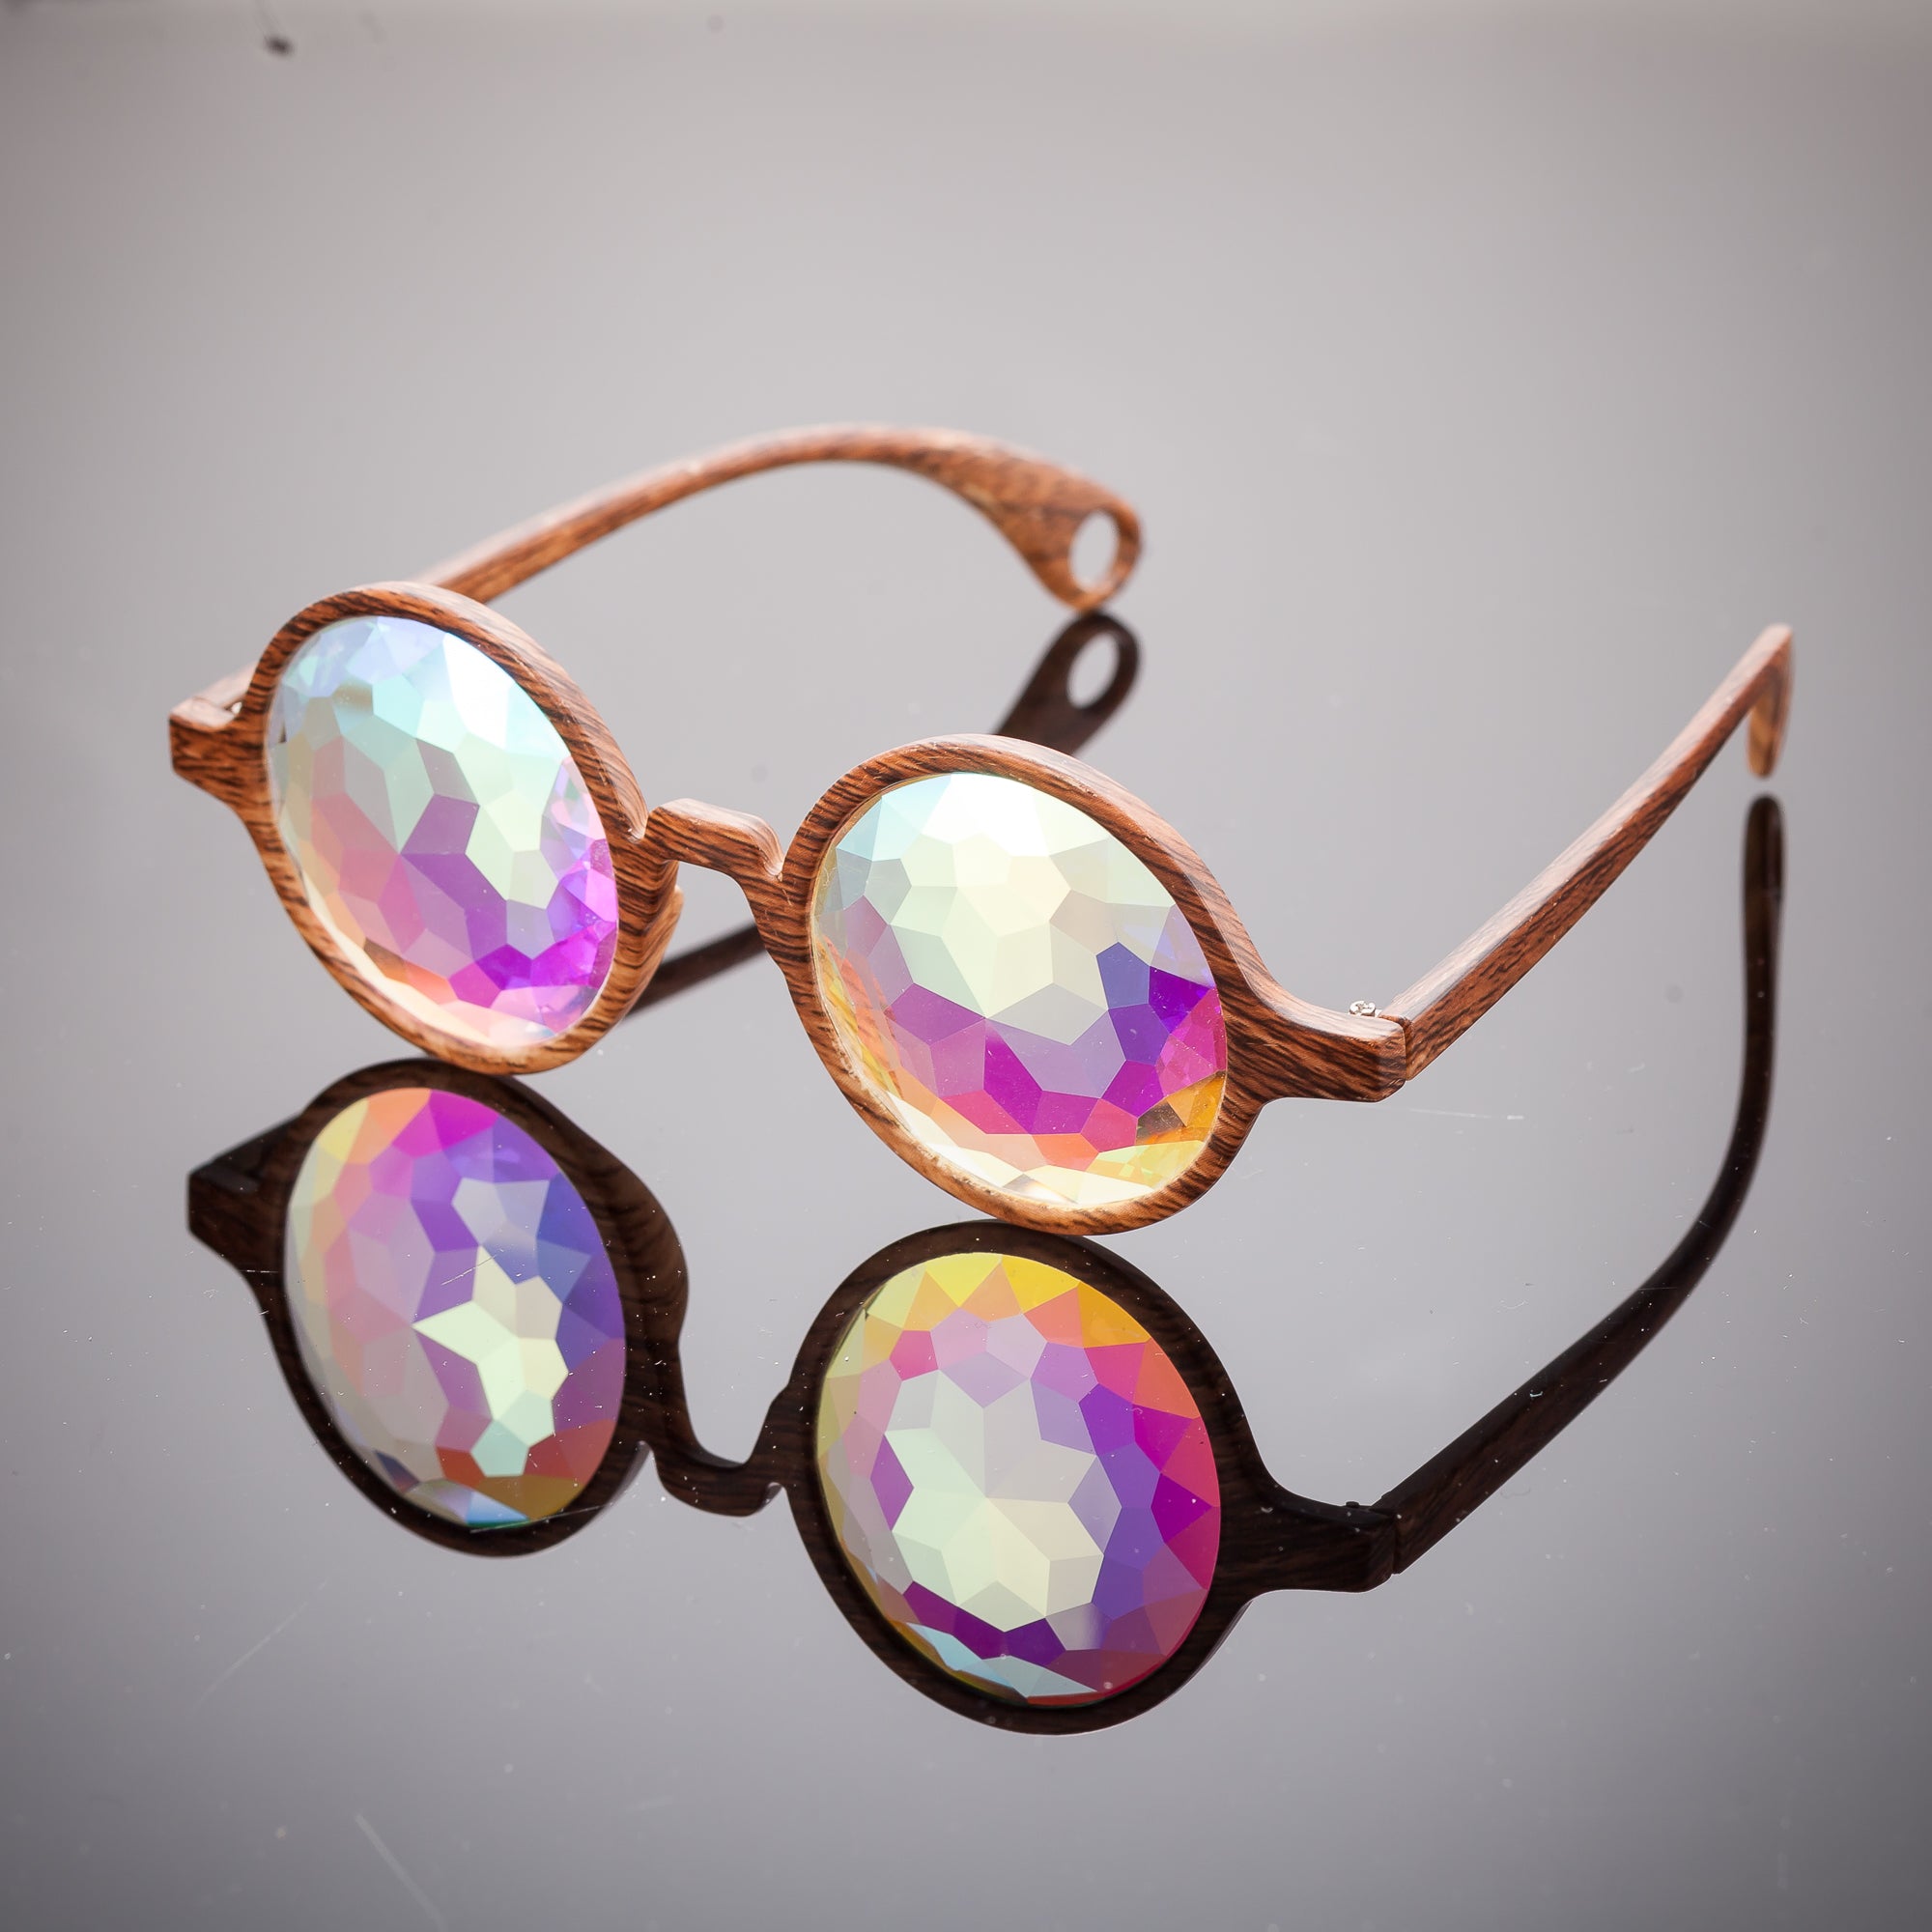 Intense Diamond Kaleidoscope Effect rainbow crystal lens Sunglasses Women Men Party Festival Bug Eye Portal Wood Round Glasses at SuperFried's Festival Accessories and Sunglasses Online store